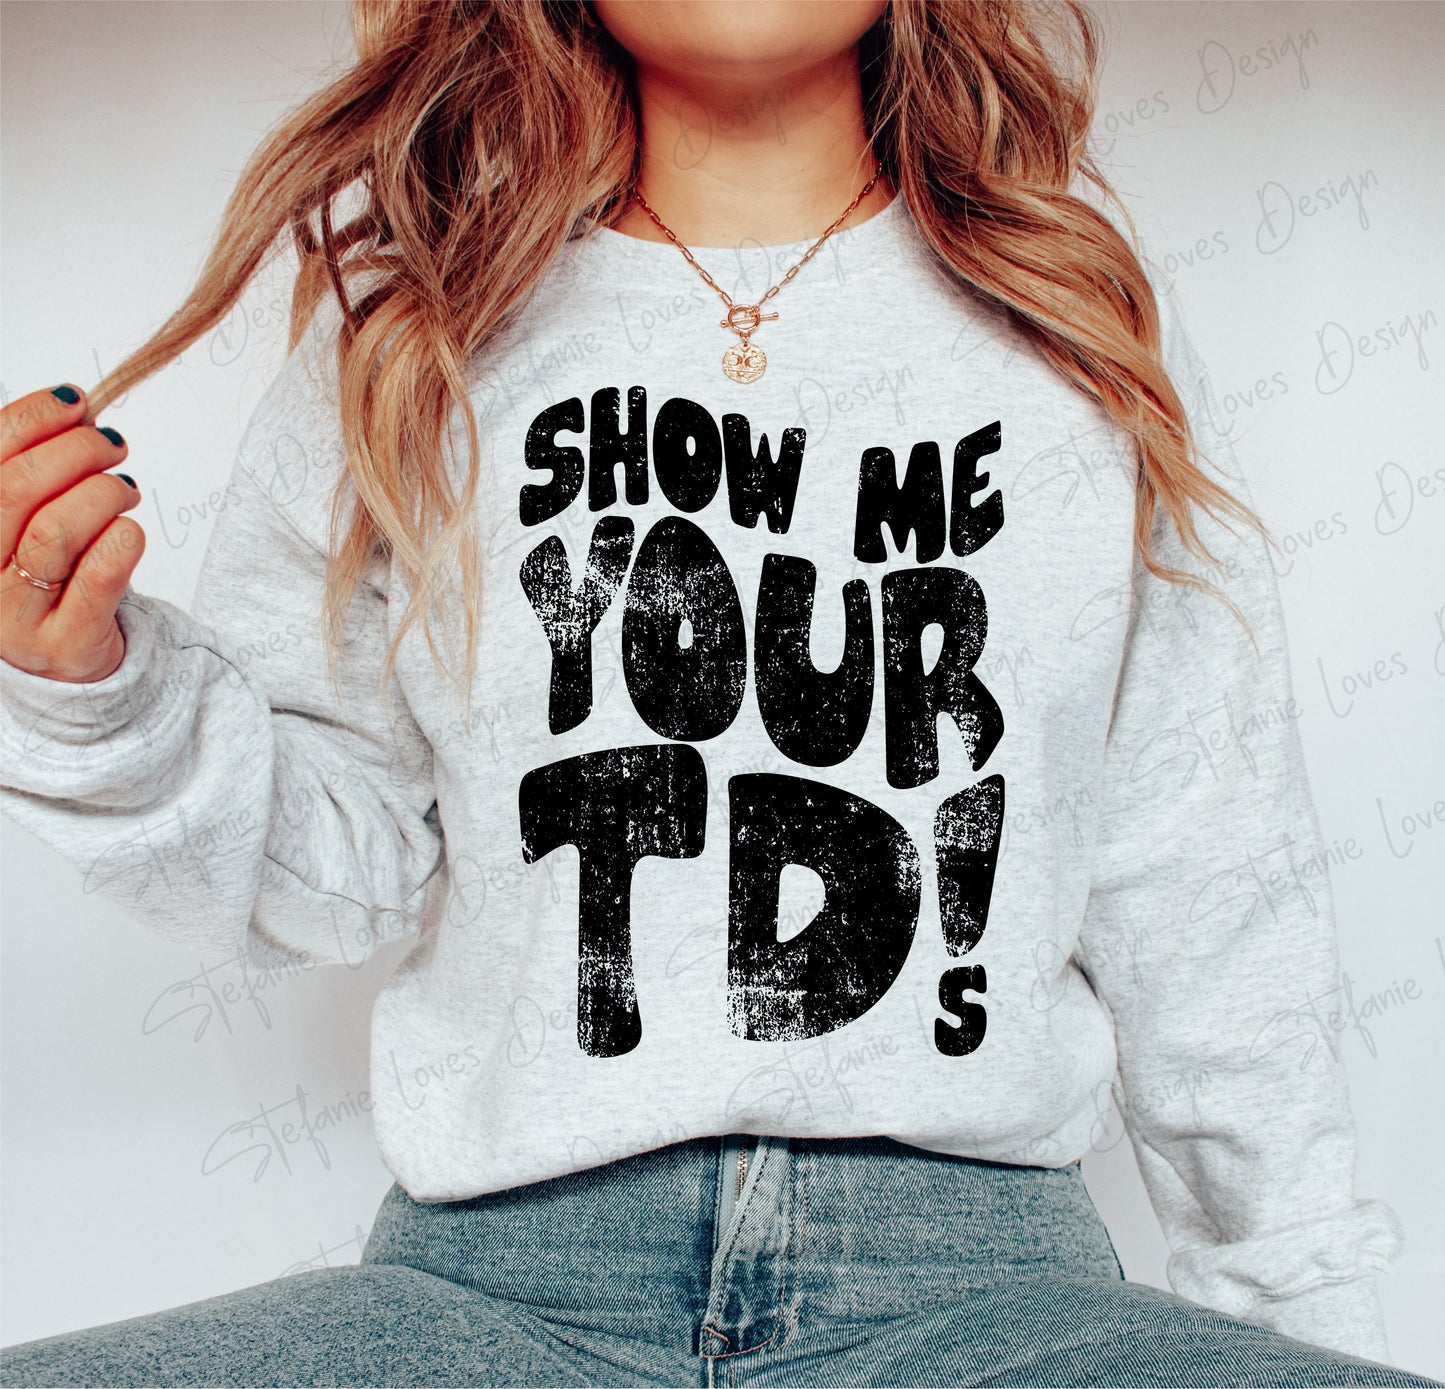 Show Me Your TDs png, Funny Football Shirt png, Football Shirt png